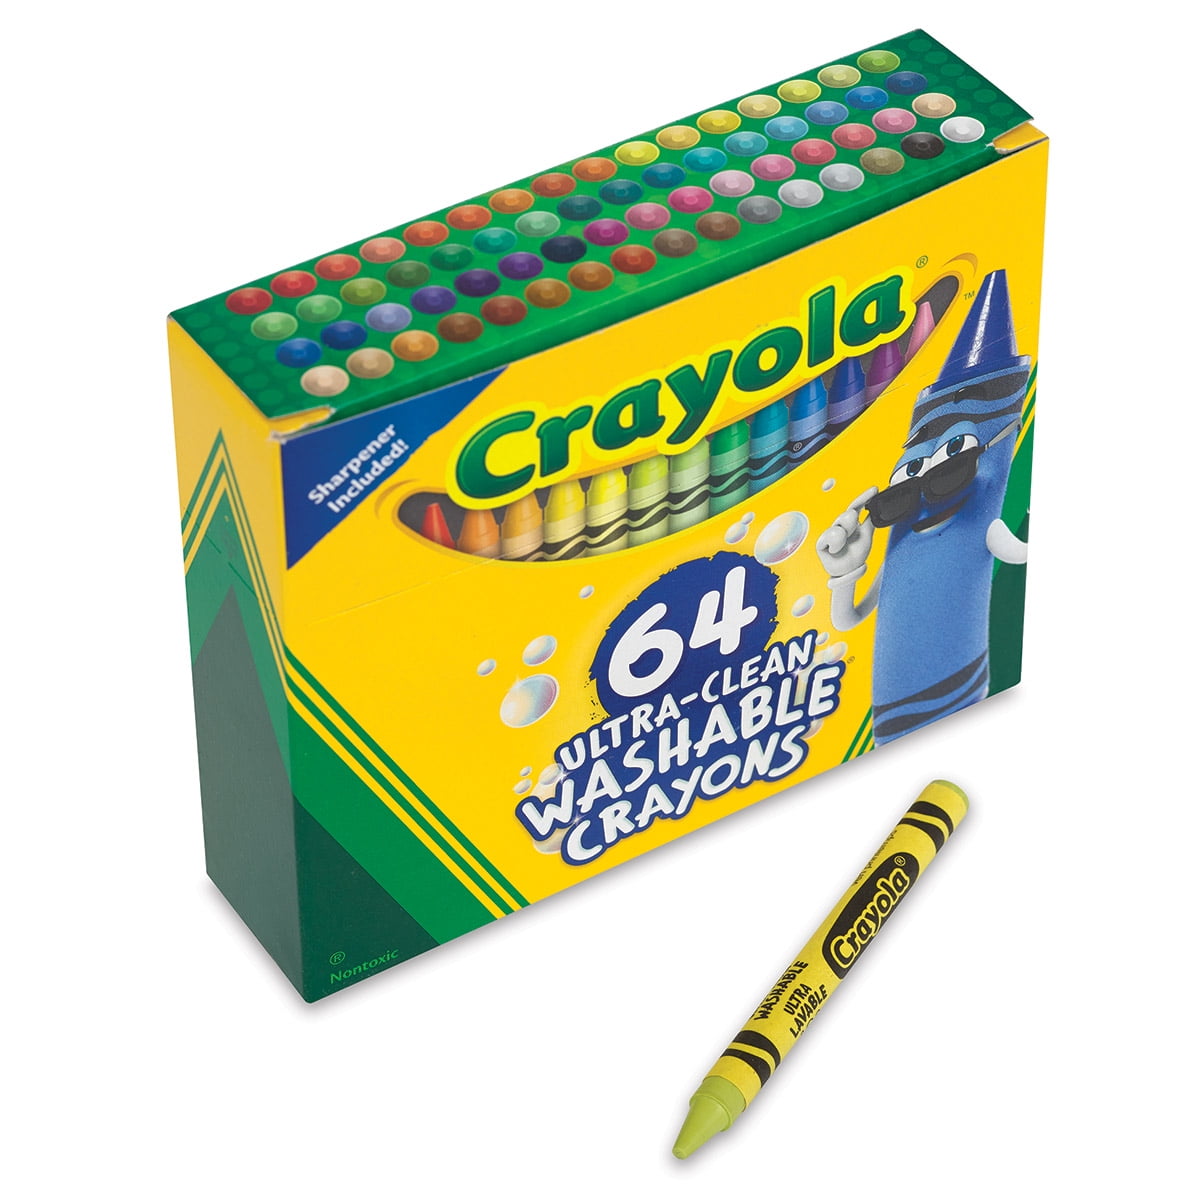 Crayola Makes Going Back To School Fun ~ Review